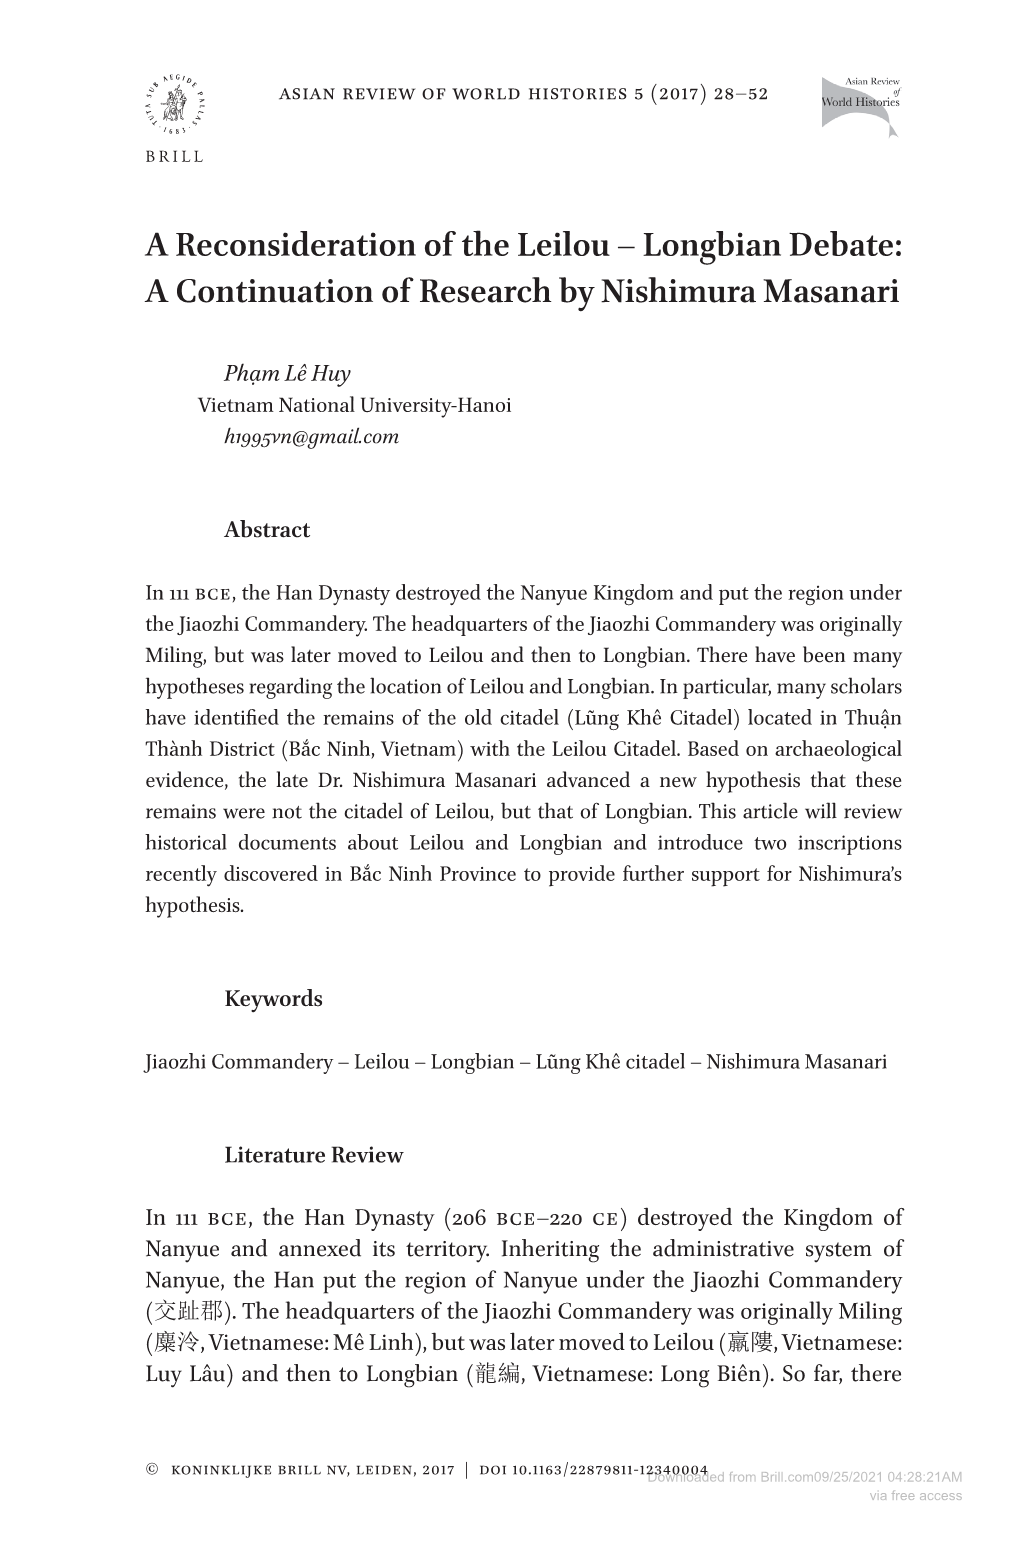 A Reconsideration of the Leilou – Longbian Debate: a Continuation of Research by Nishimura Masanari